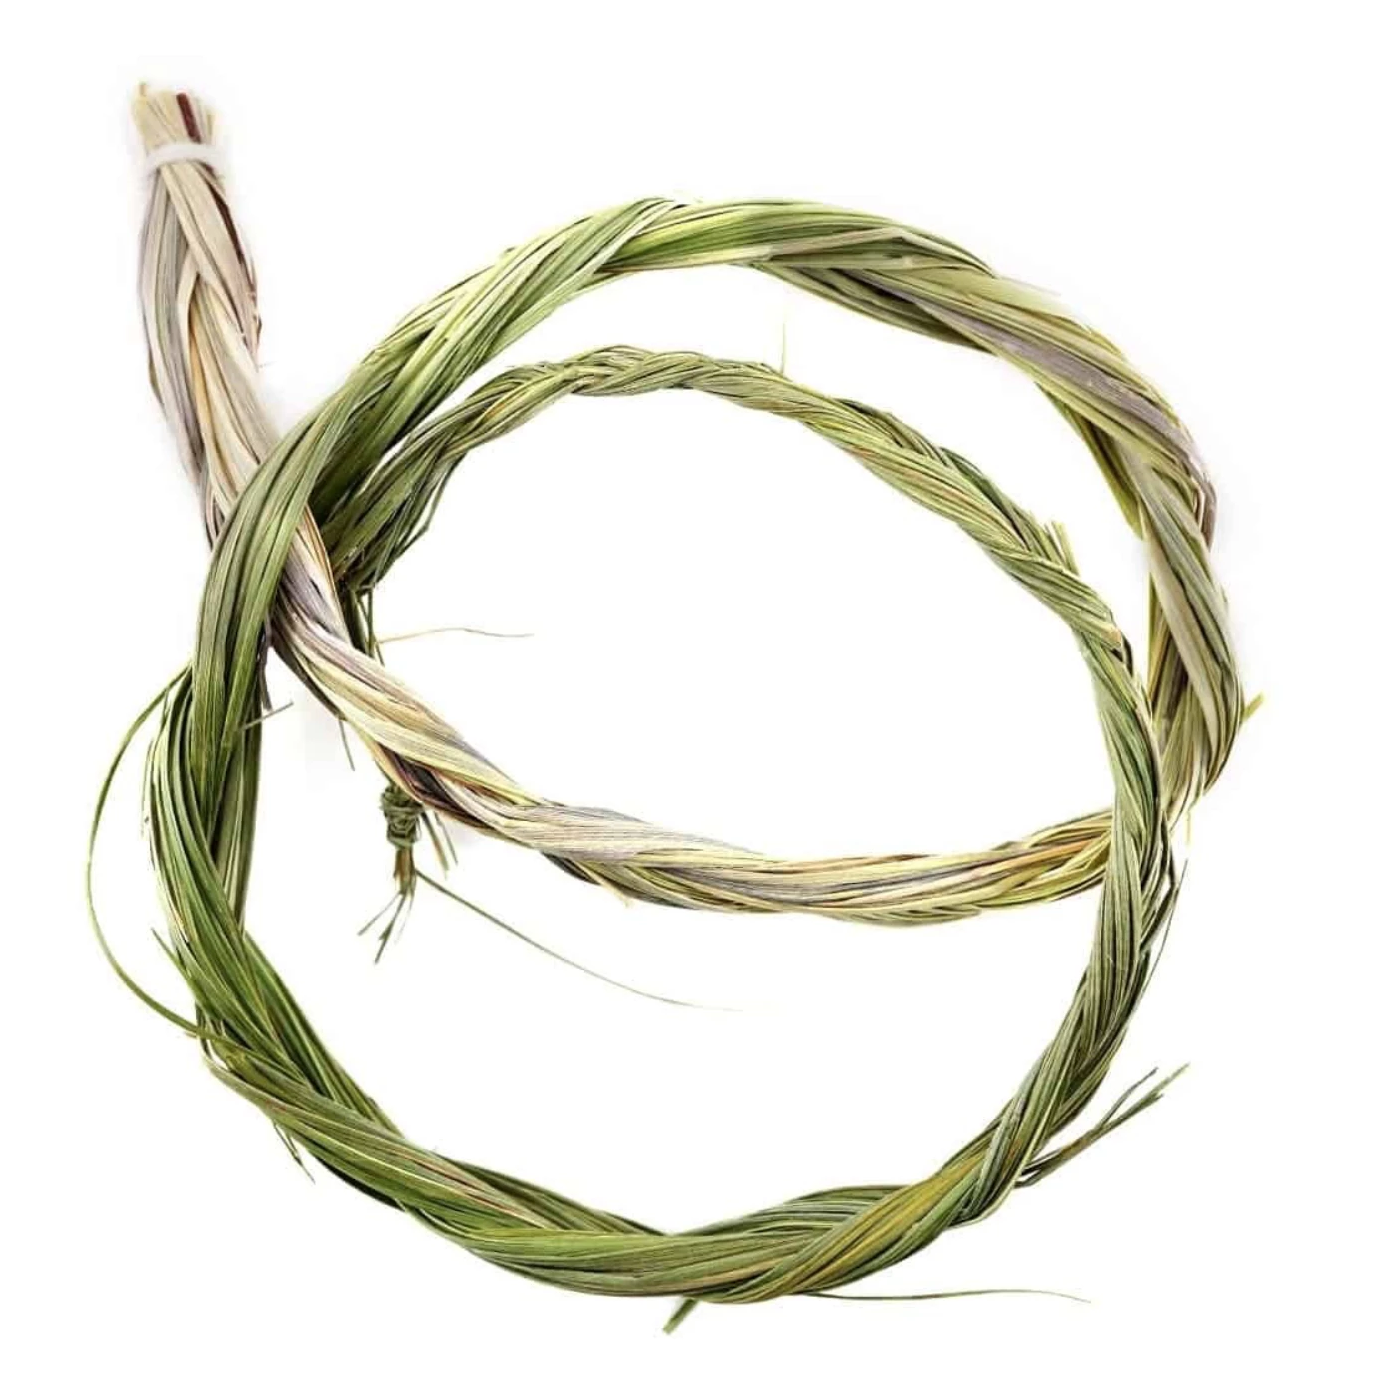  CircuitOffice Sweetgrass Braid 24 Smudging Herb Incense For  Purifying, Cleansing, Healing, Metaphysical, Meditation and Wicca : Home &  Kitchen